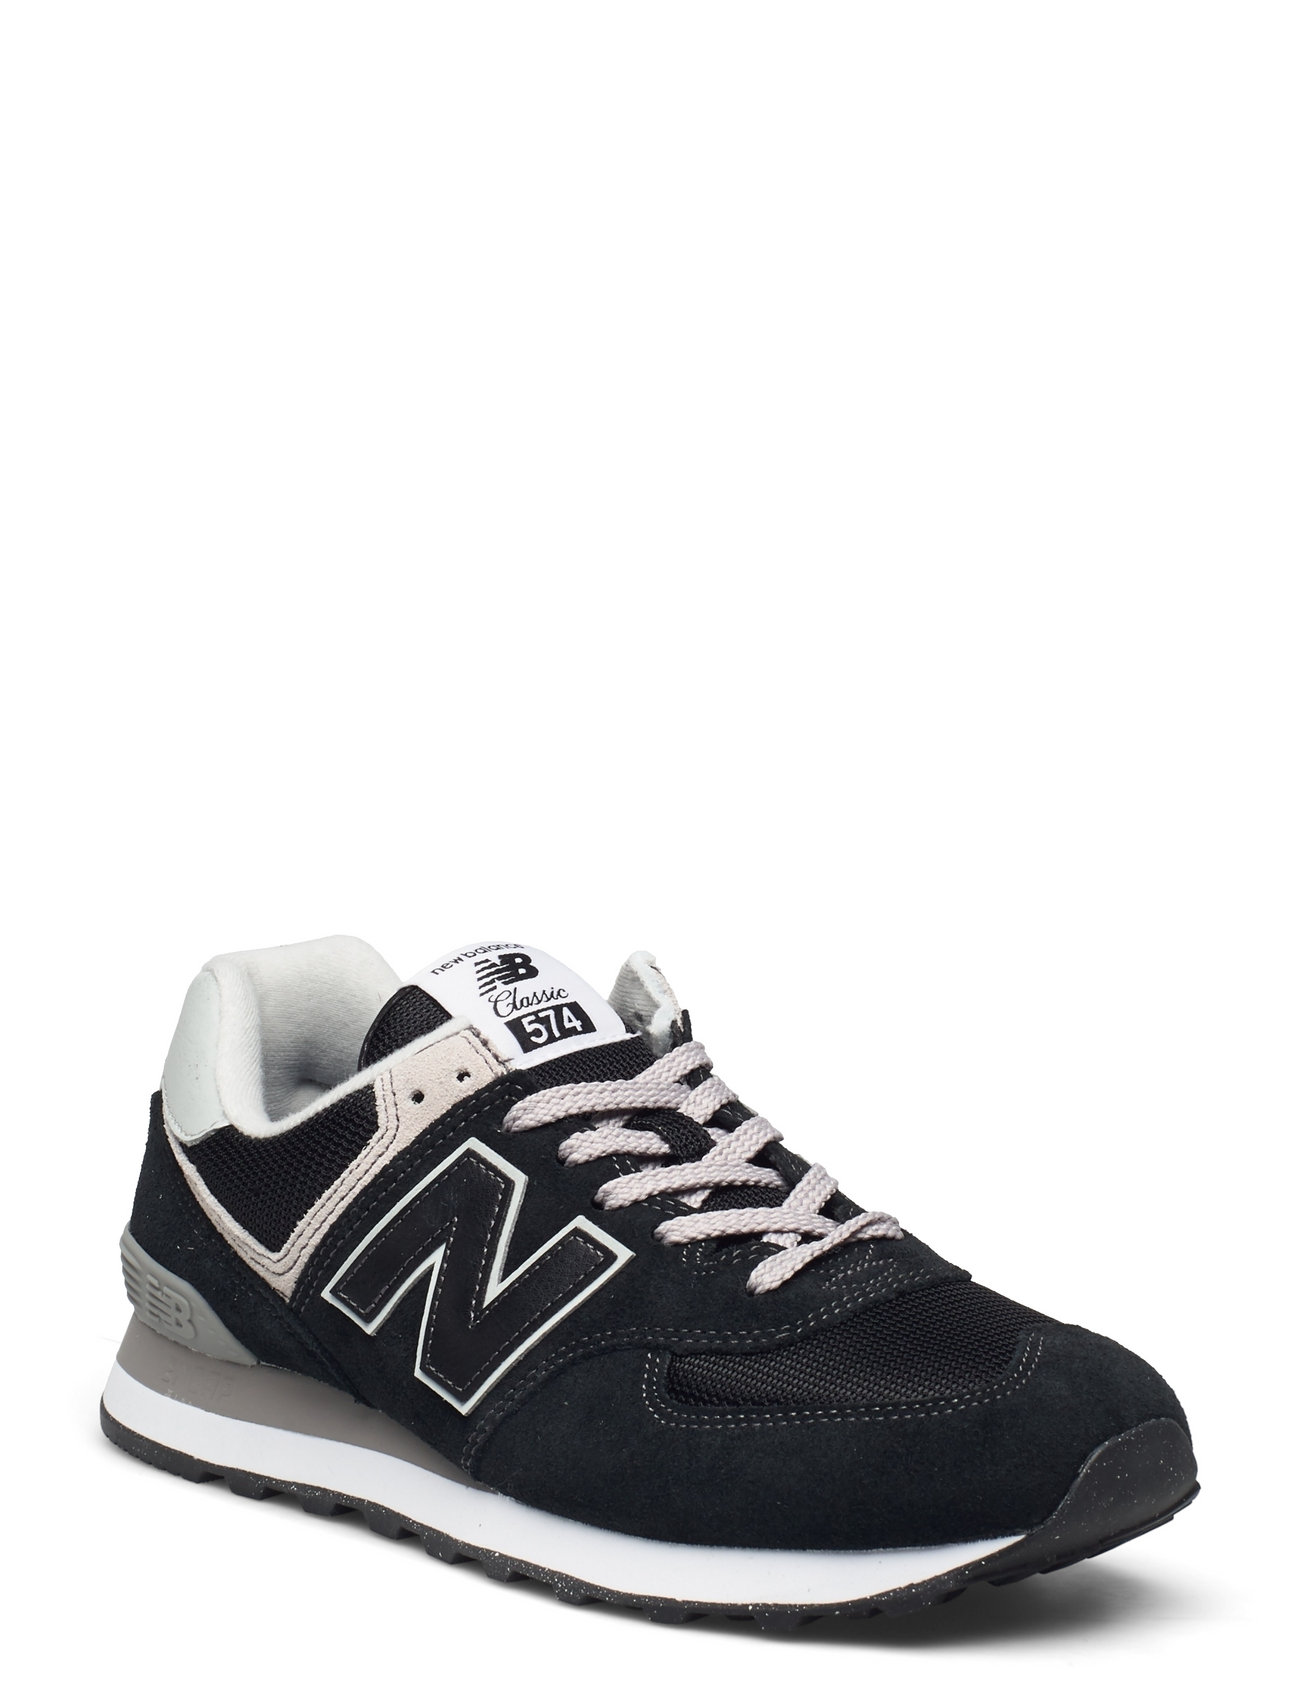 New Balance 574 Sport Sneakers Low-top Sneakers Multi/patterned New Balance